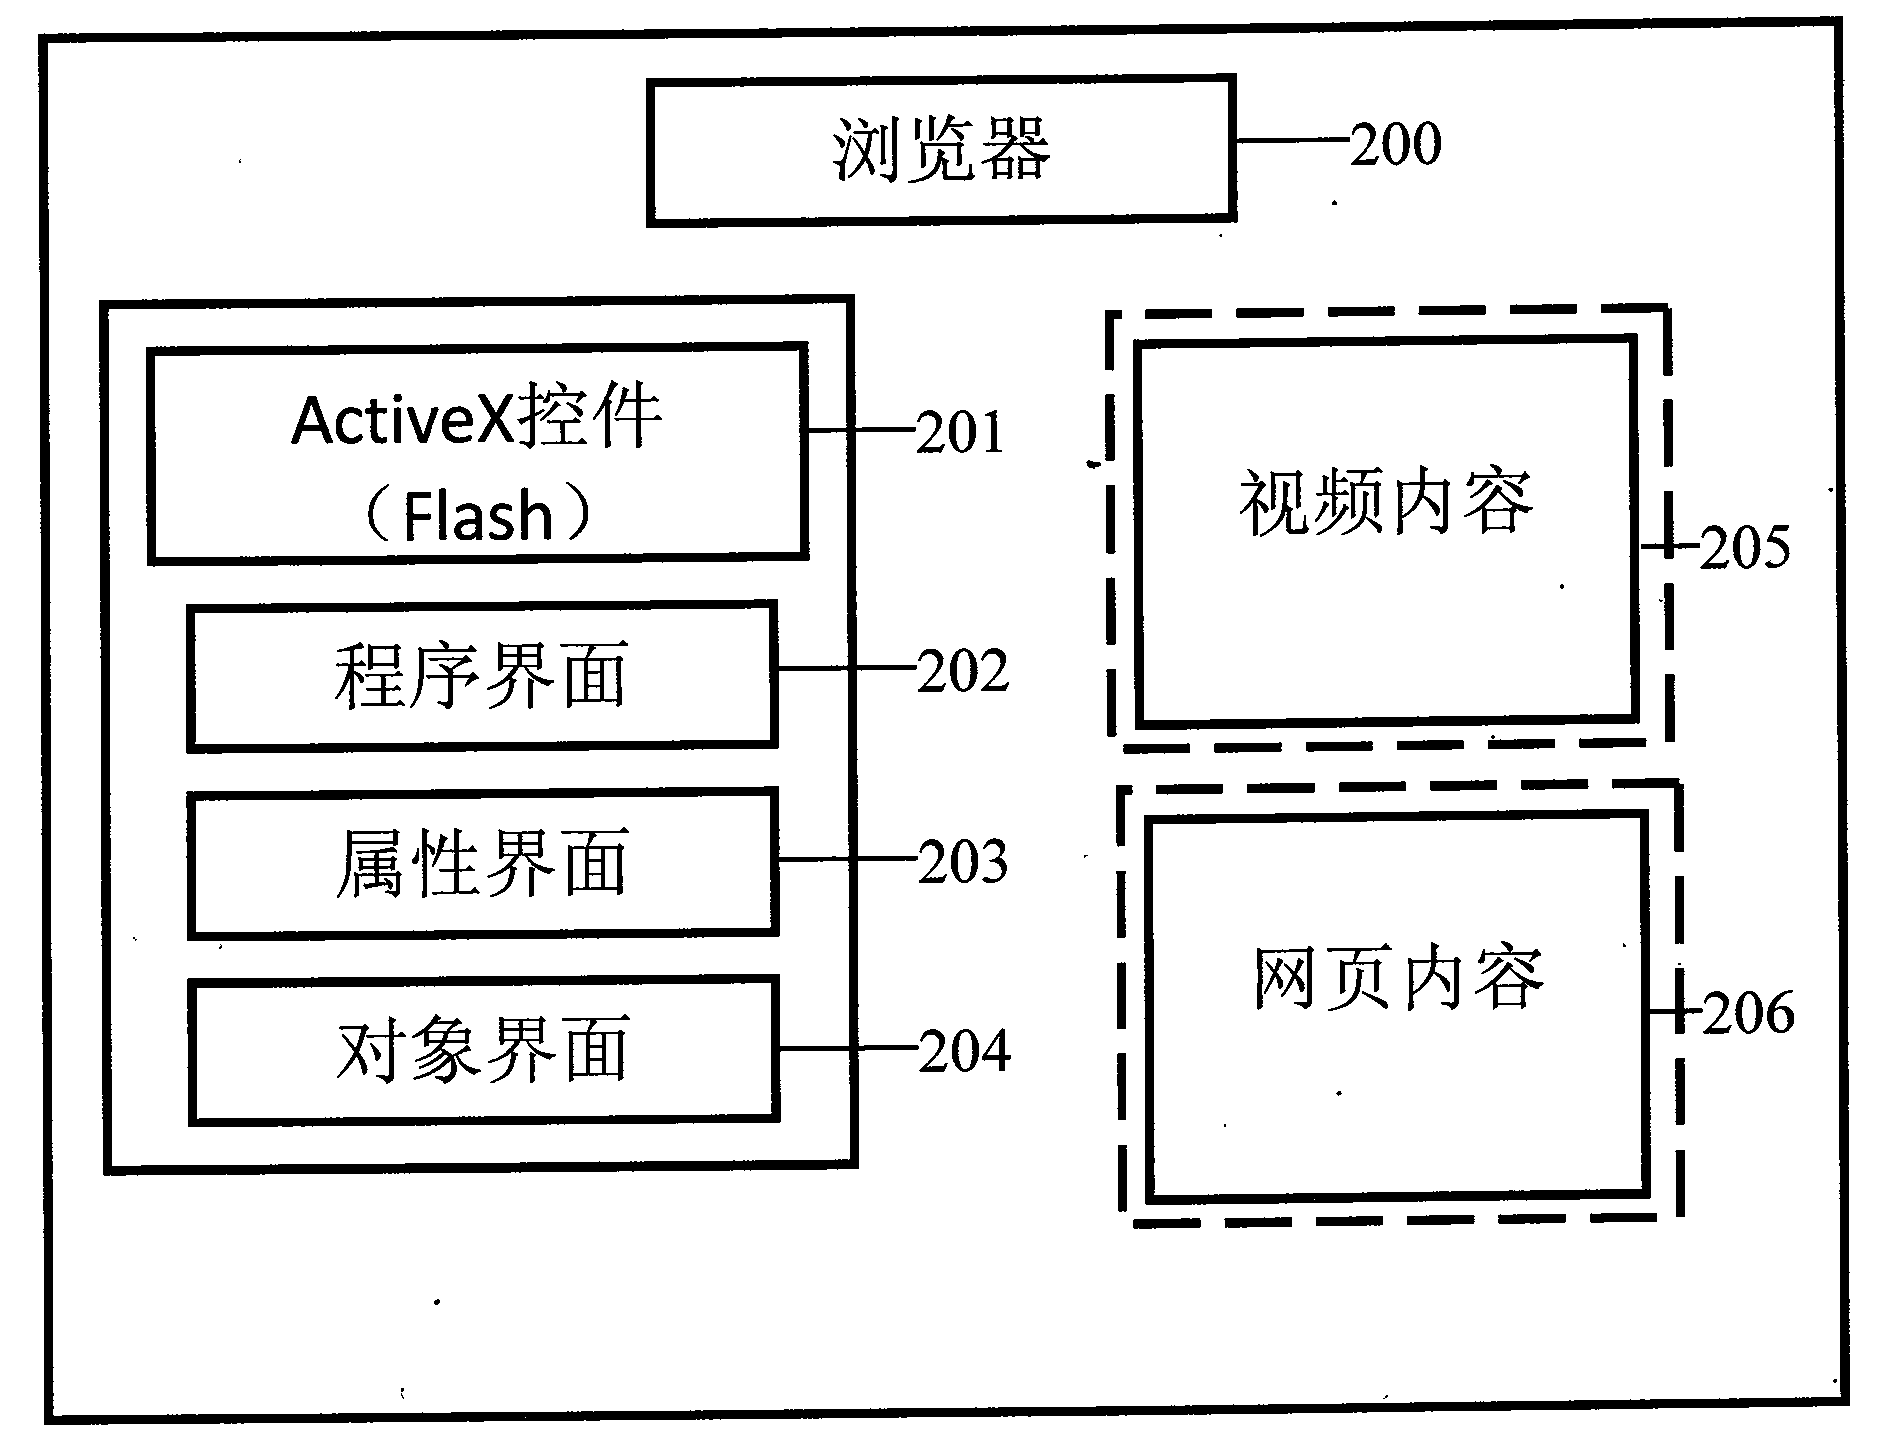 Method and system for interaction of video elements and web page elements in web pages